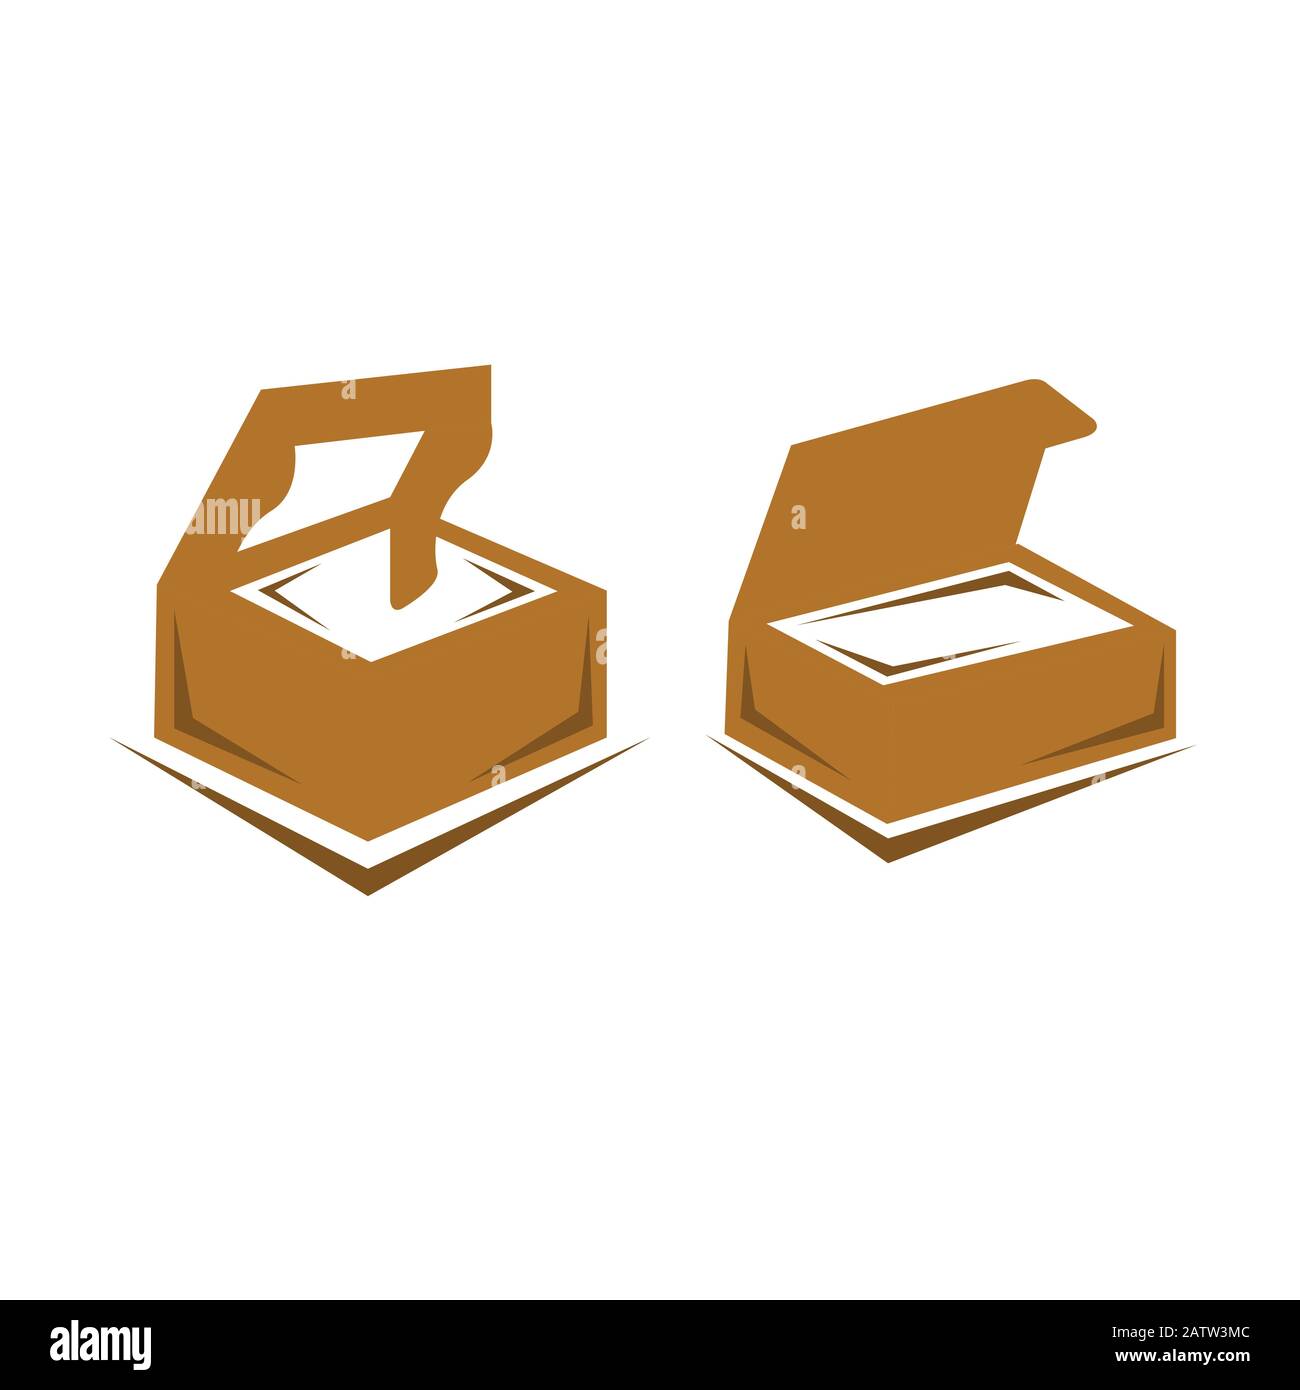 A box icon in modern style. High quality black outline image for web site design and mobile apps. Stock Vector